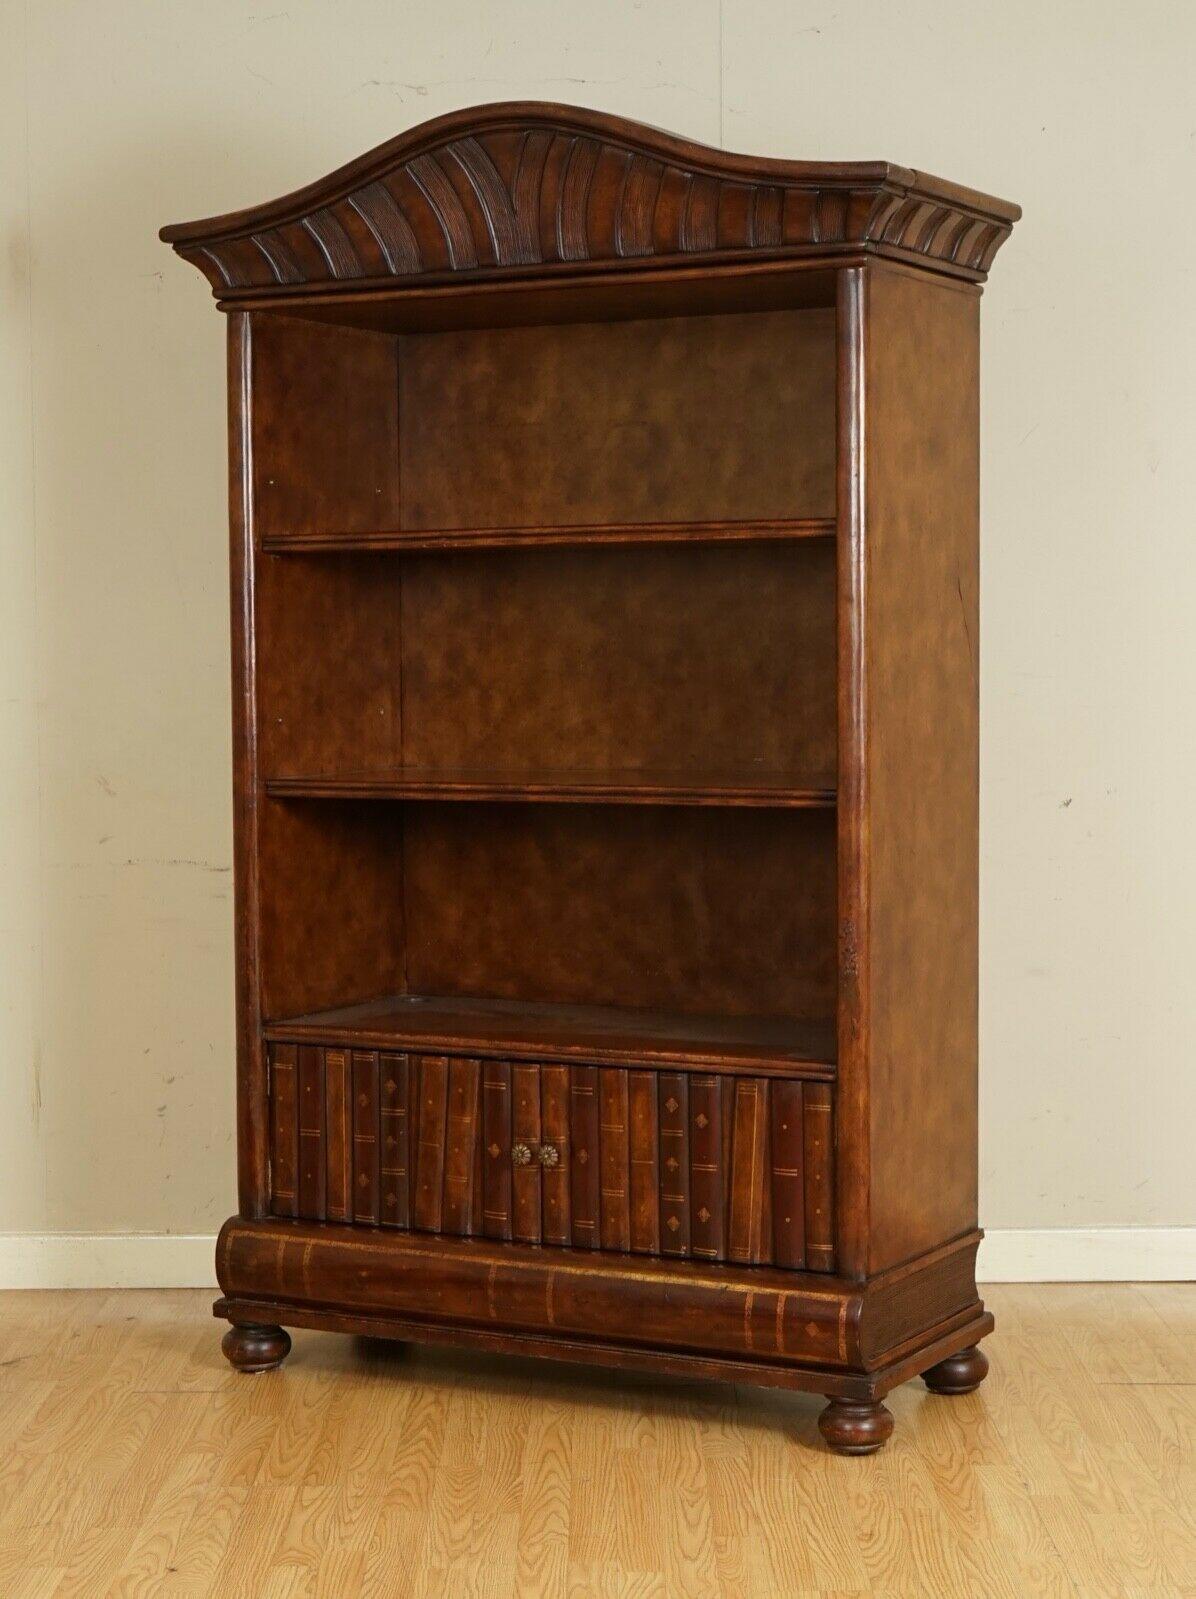 We are delighted to offer for sale this Outstanding Rare Theodore Alexander Open Leather Bookcase.

This is one of the small limited productions that Theodore Alexander had made. 

It's made from solid wood and has a lovely good quality leather